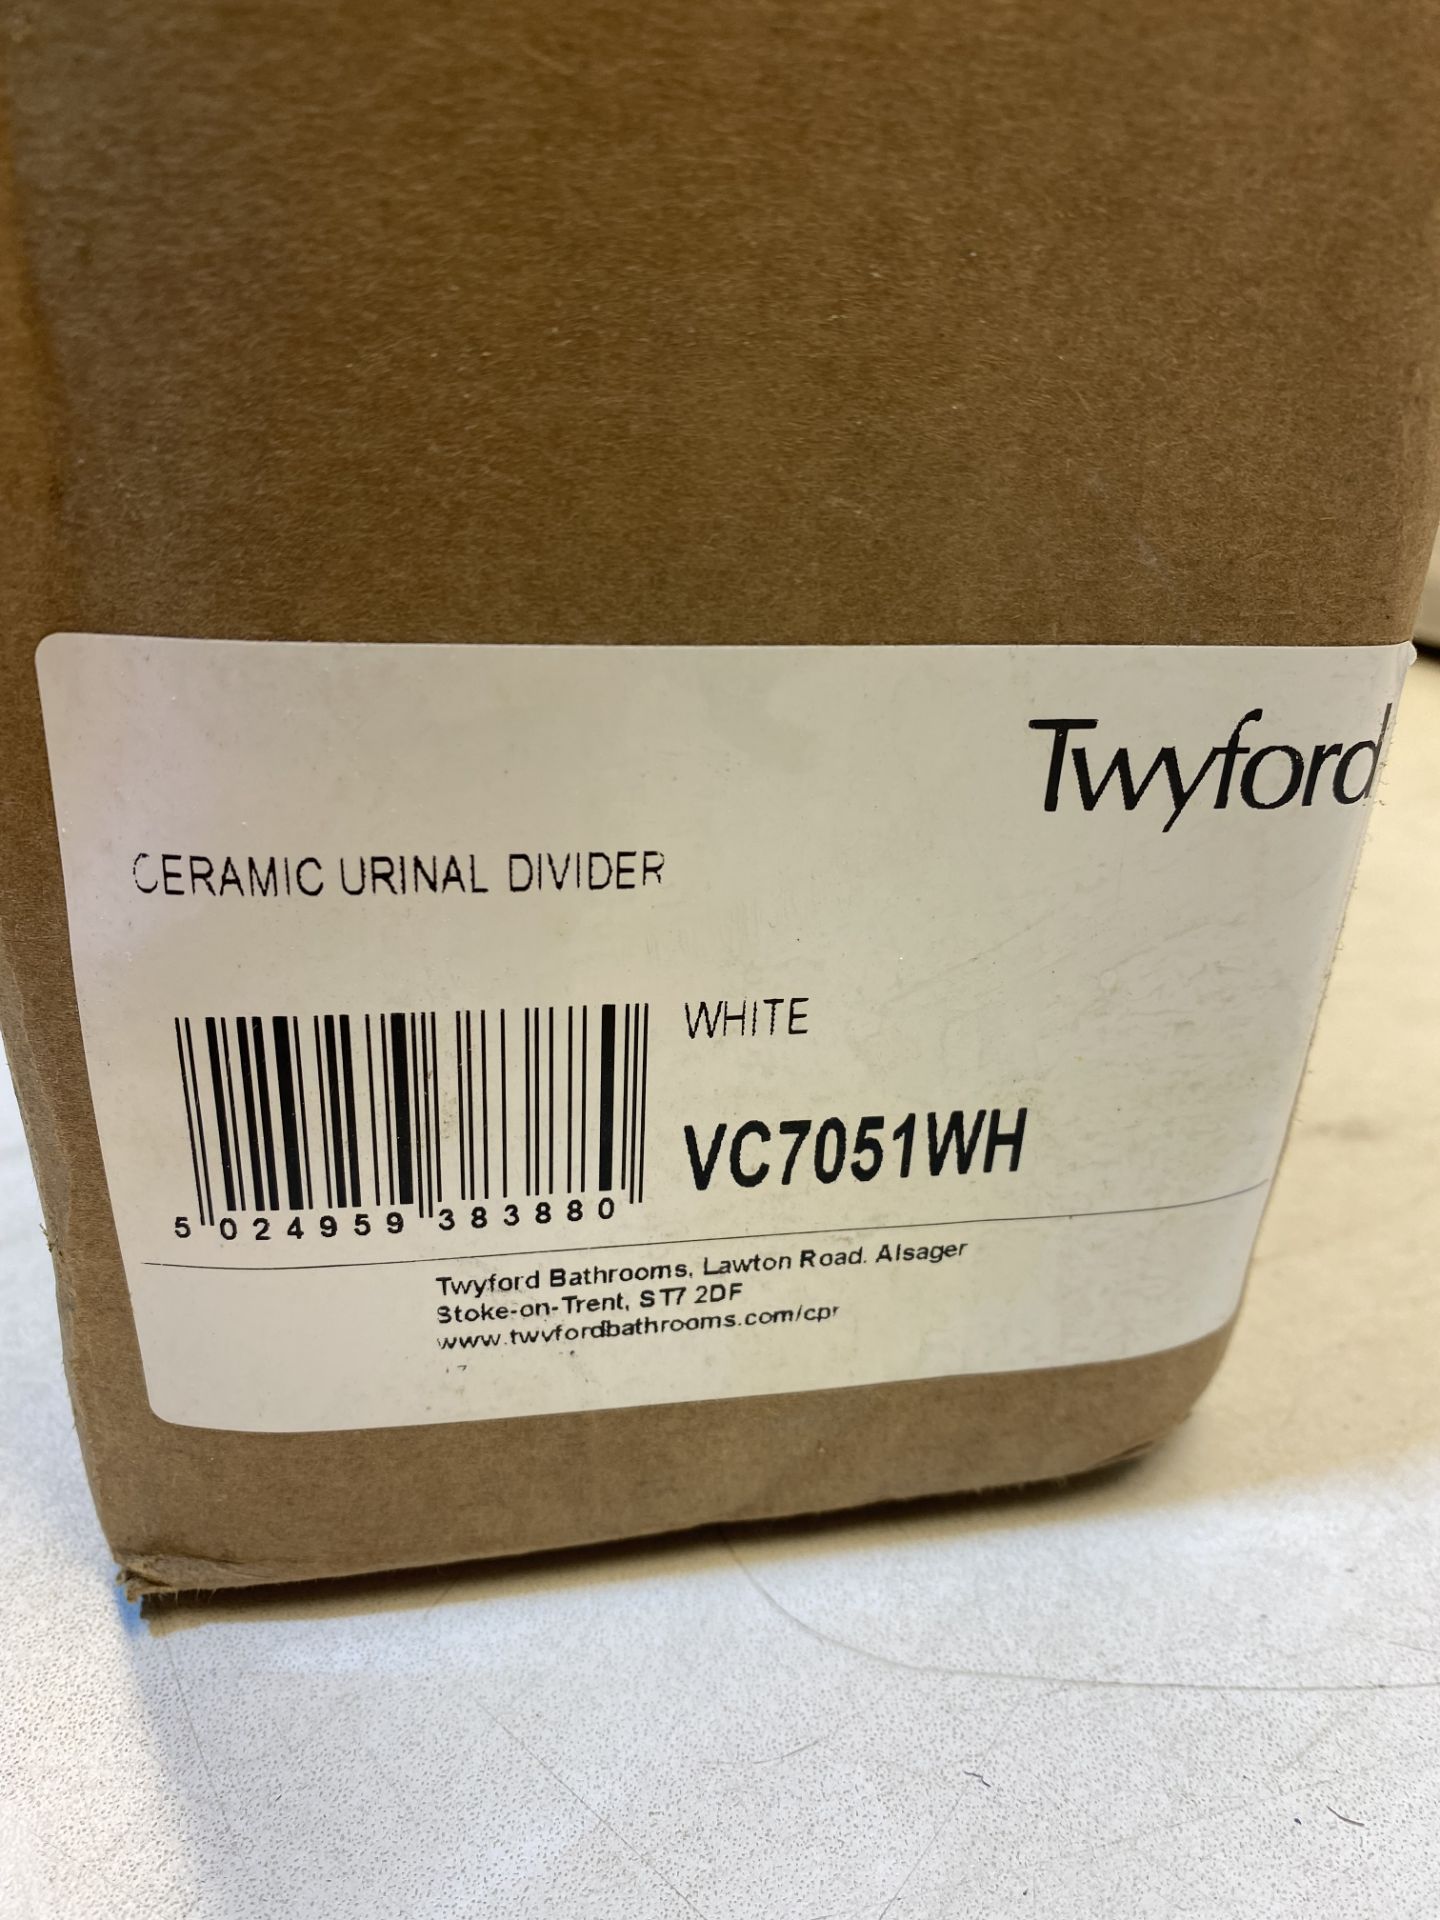 Twyford VC7051WH Ceramic Urinal Division with Fixing - White - Image 4 of 5